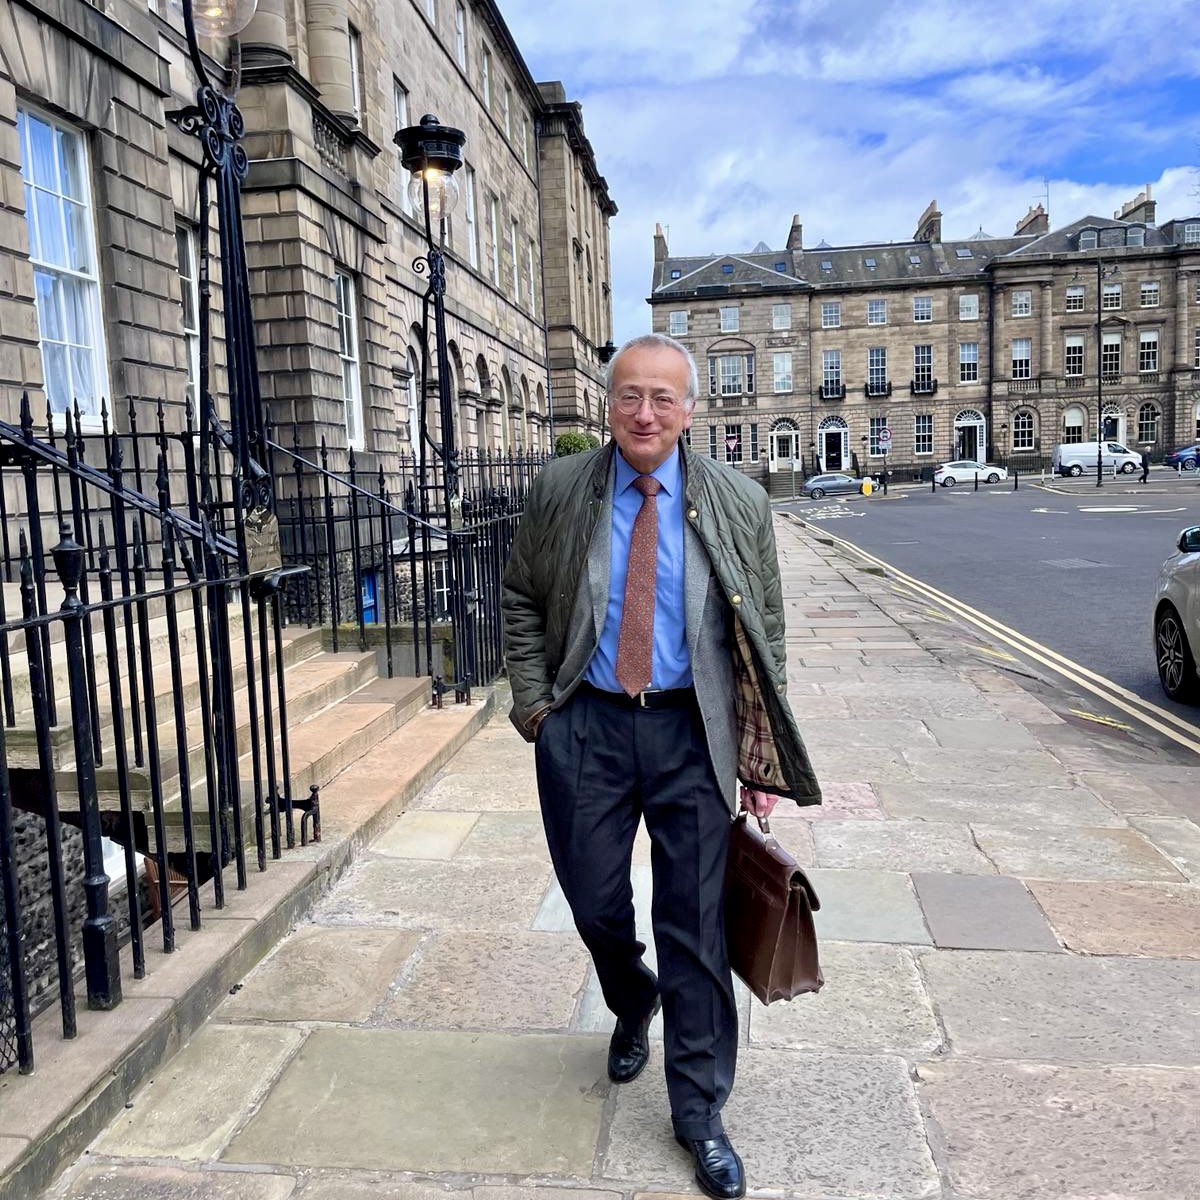 Looking forward to visiting Scotland this week. I will be visiting Edinburgh, the Orkneys as well as Glasgow and meet with key stakeholders from politics, academia and civil society. Very much looking forward to discovering some more of this beautiful country.